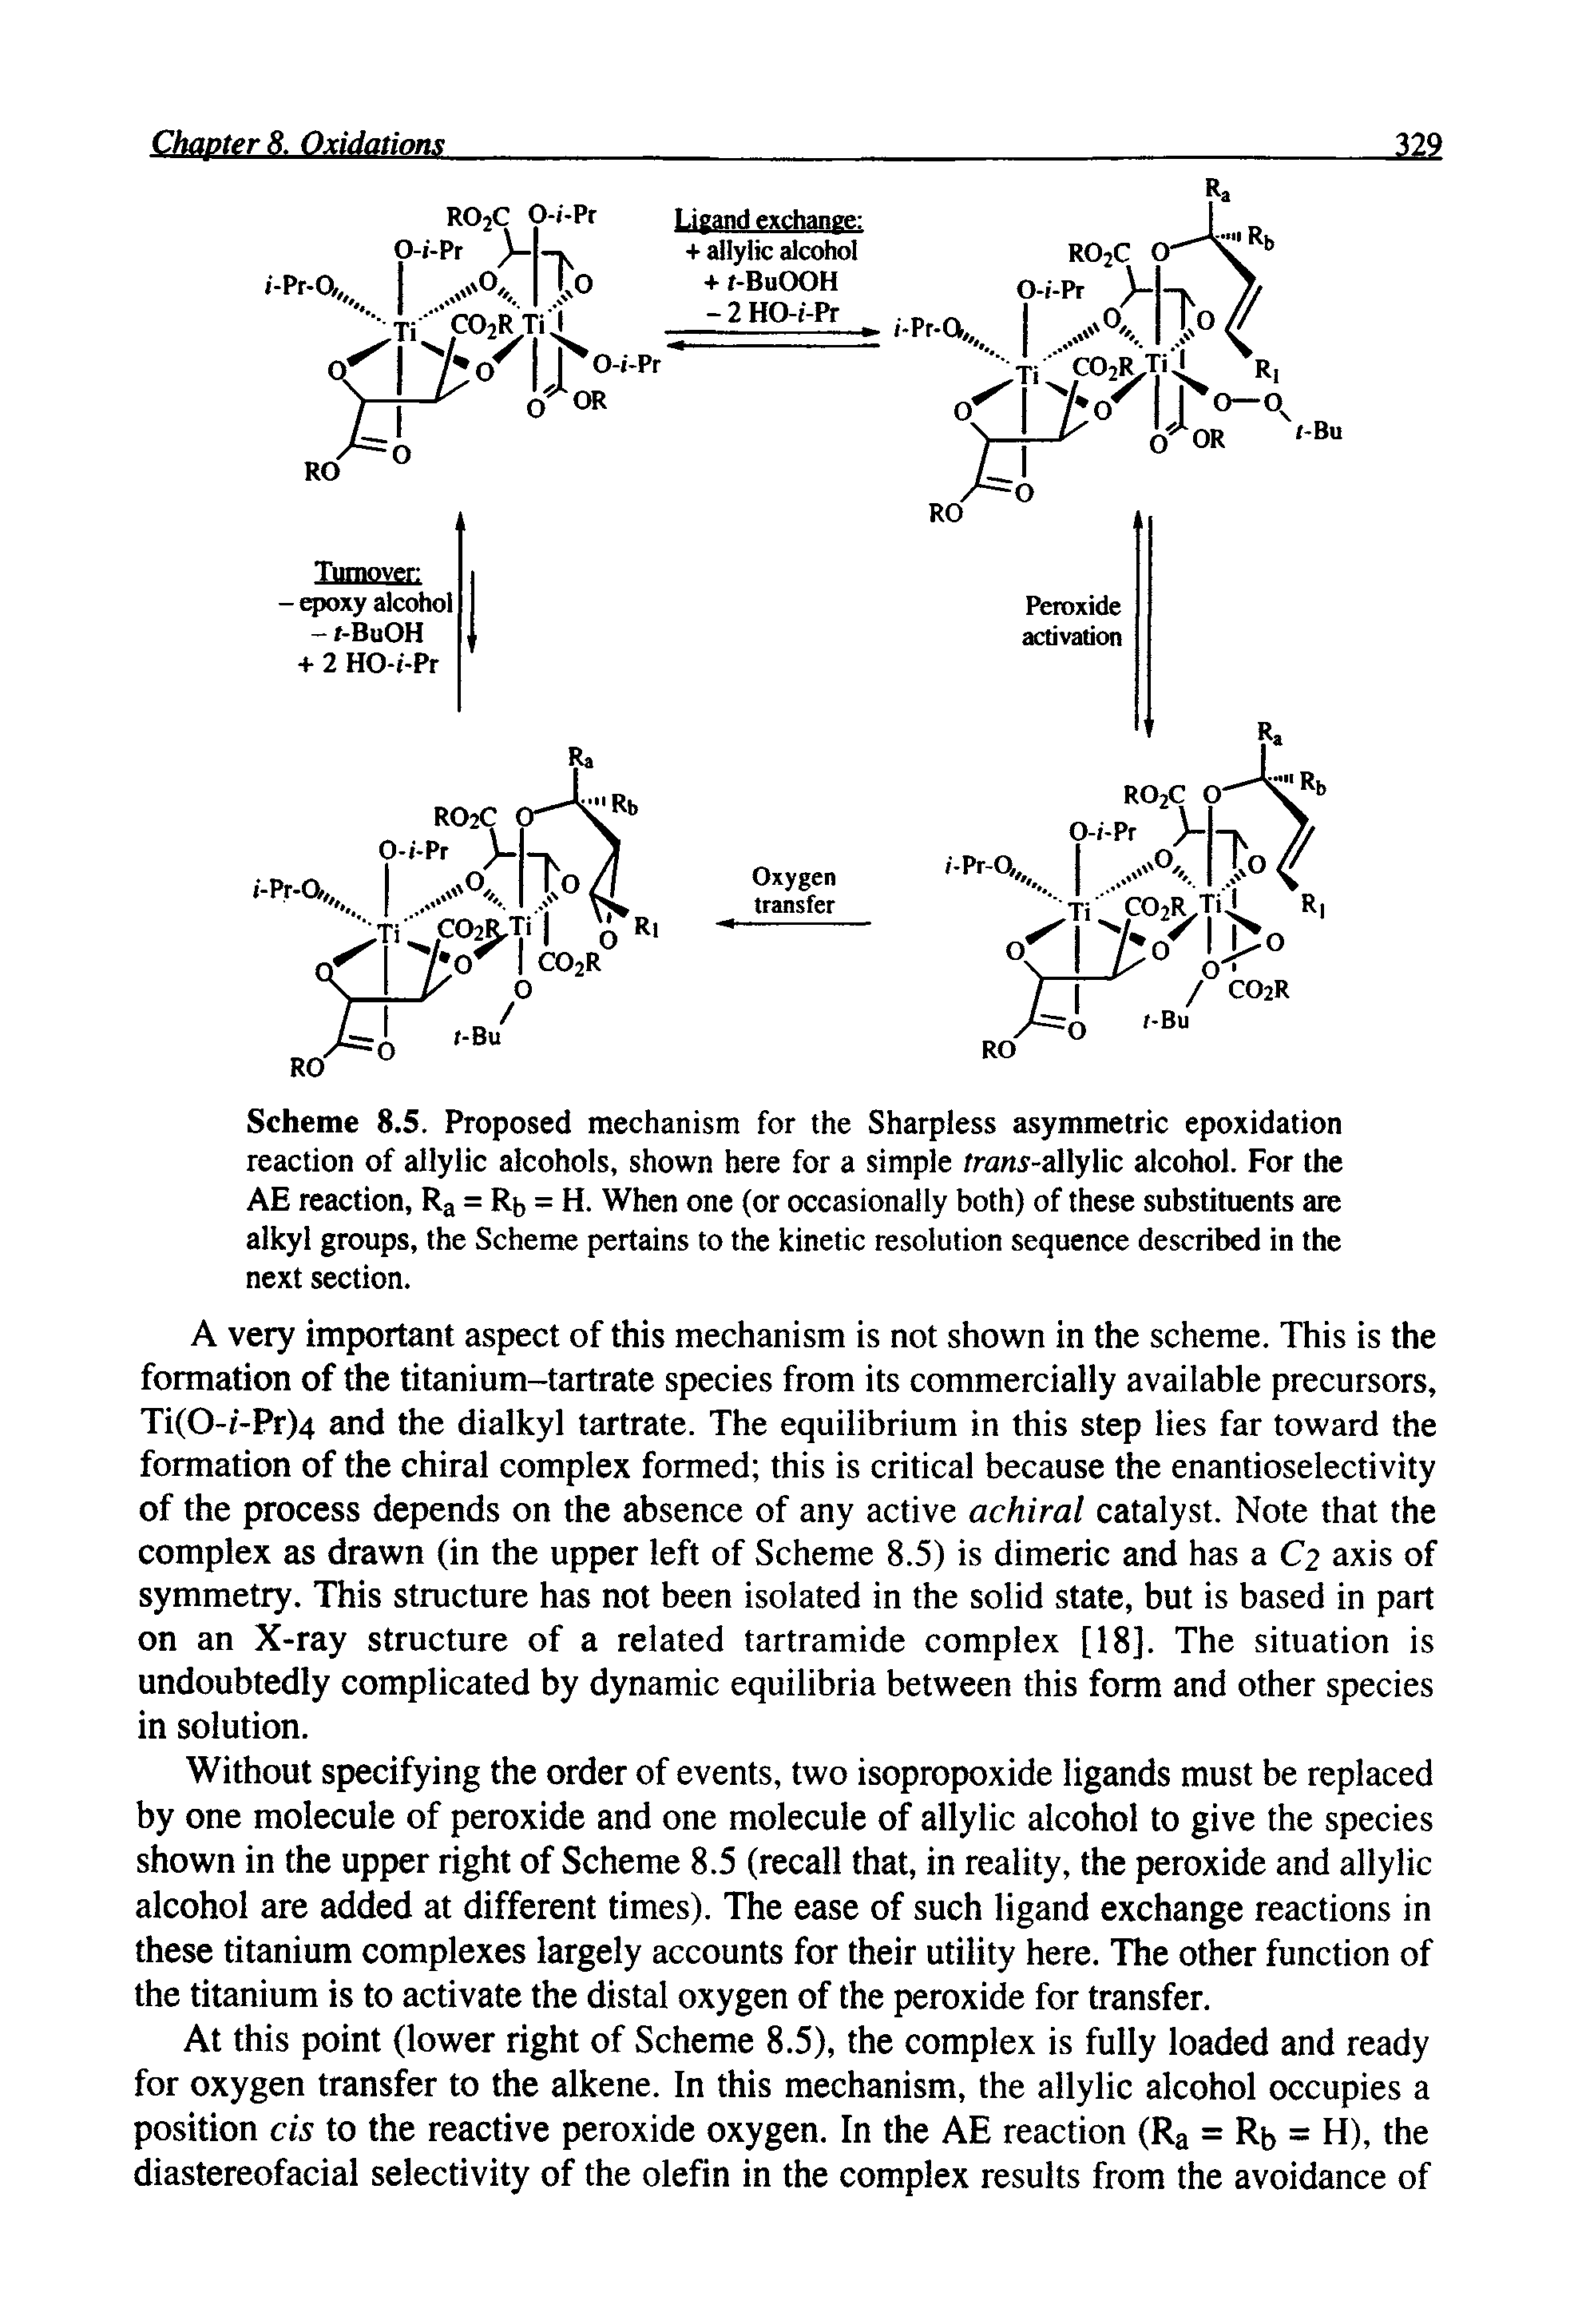 Scheme 8.5. Proposed mechanism for the Sharpless asymmetric epoxidation reaction of allylic alcohols, shown here for a simple tran -allylic alcohol. For the AE reaction, Ra = Rb = H. When one (or occasionally both) of these substituents are alkyl groups, the Scheme pertains to the kinetic resolution sequence described in the next section.